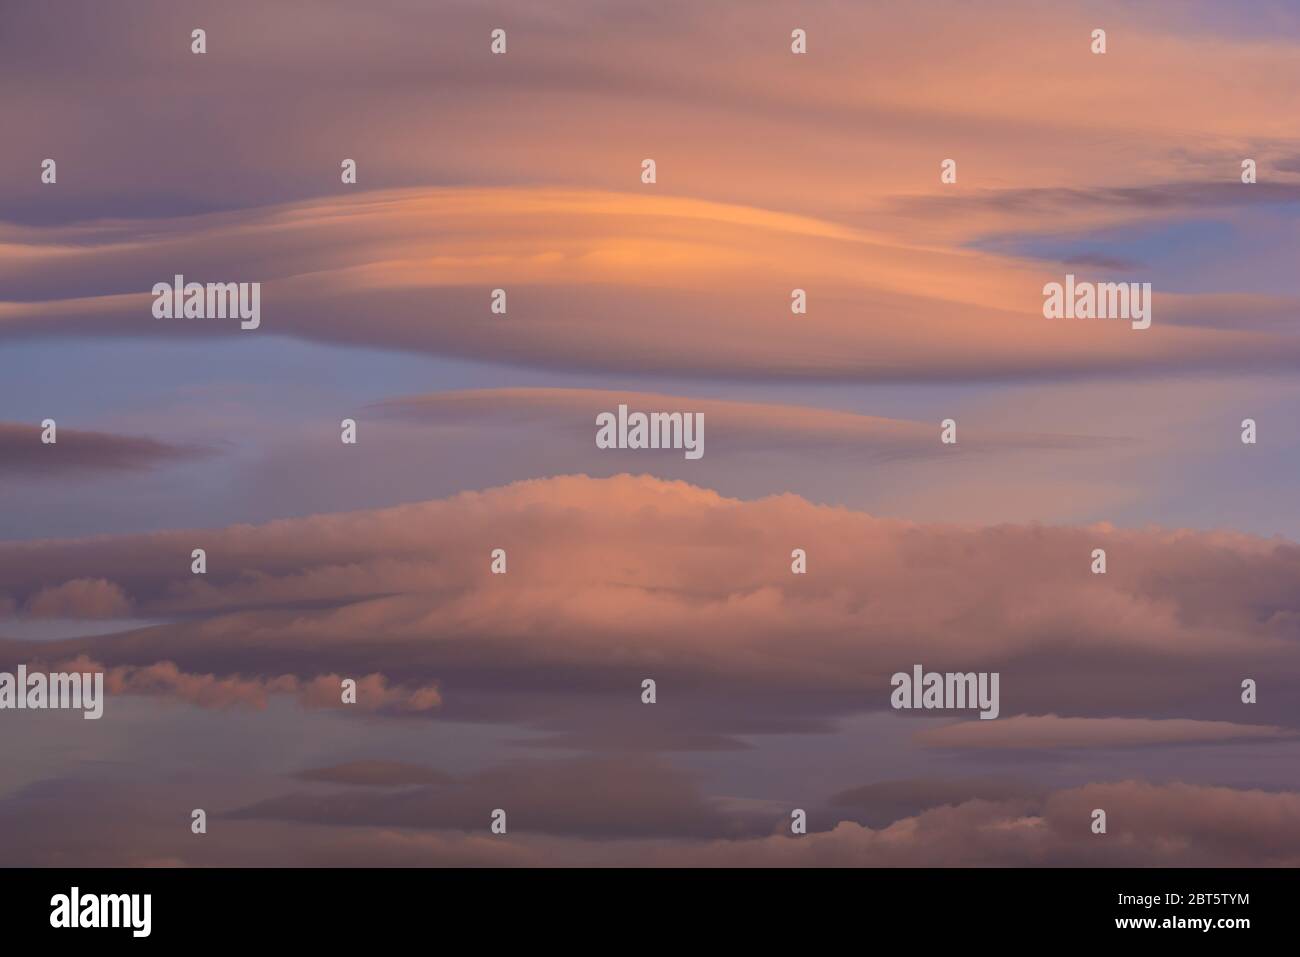 Lenticular clouds over the sky at dawn with reddish and orange colors Stock Photo